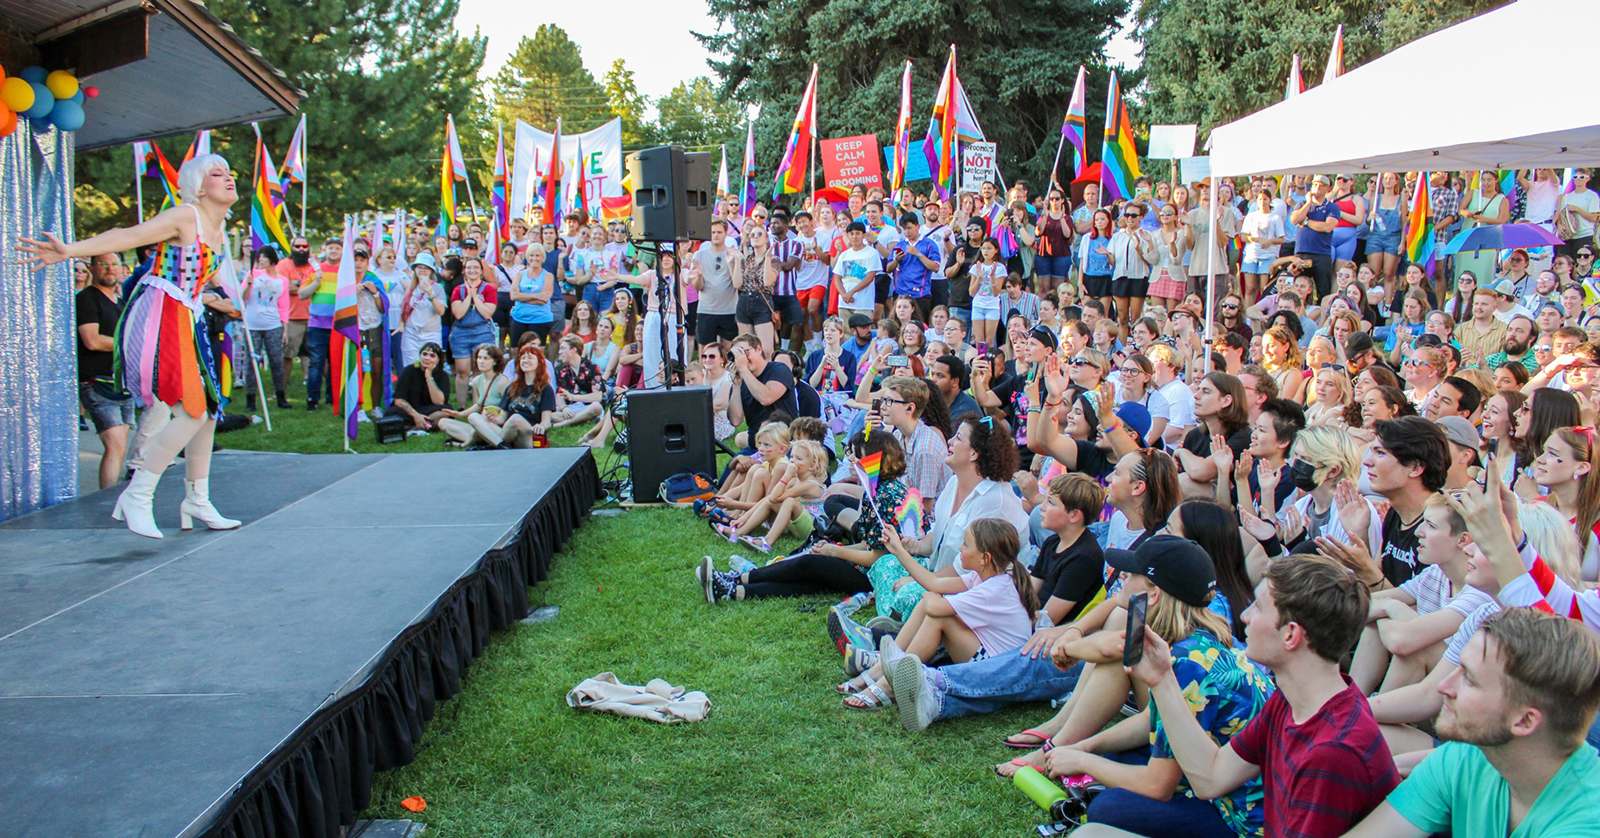 The attend a Back to School Pride 2022 at Kiwanis Park in Provo, Utah. Photo courtesy The Raynbow Collective